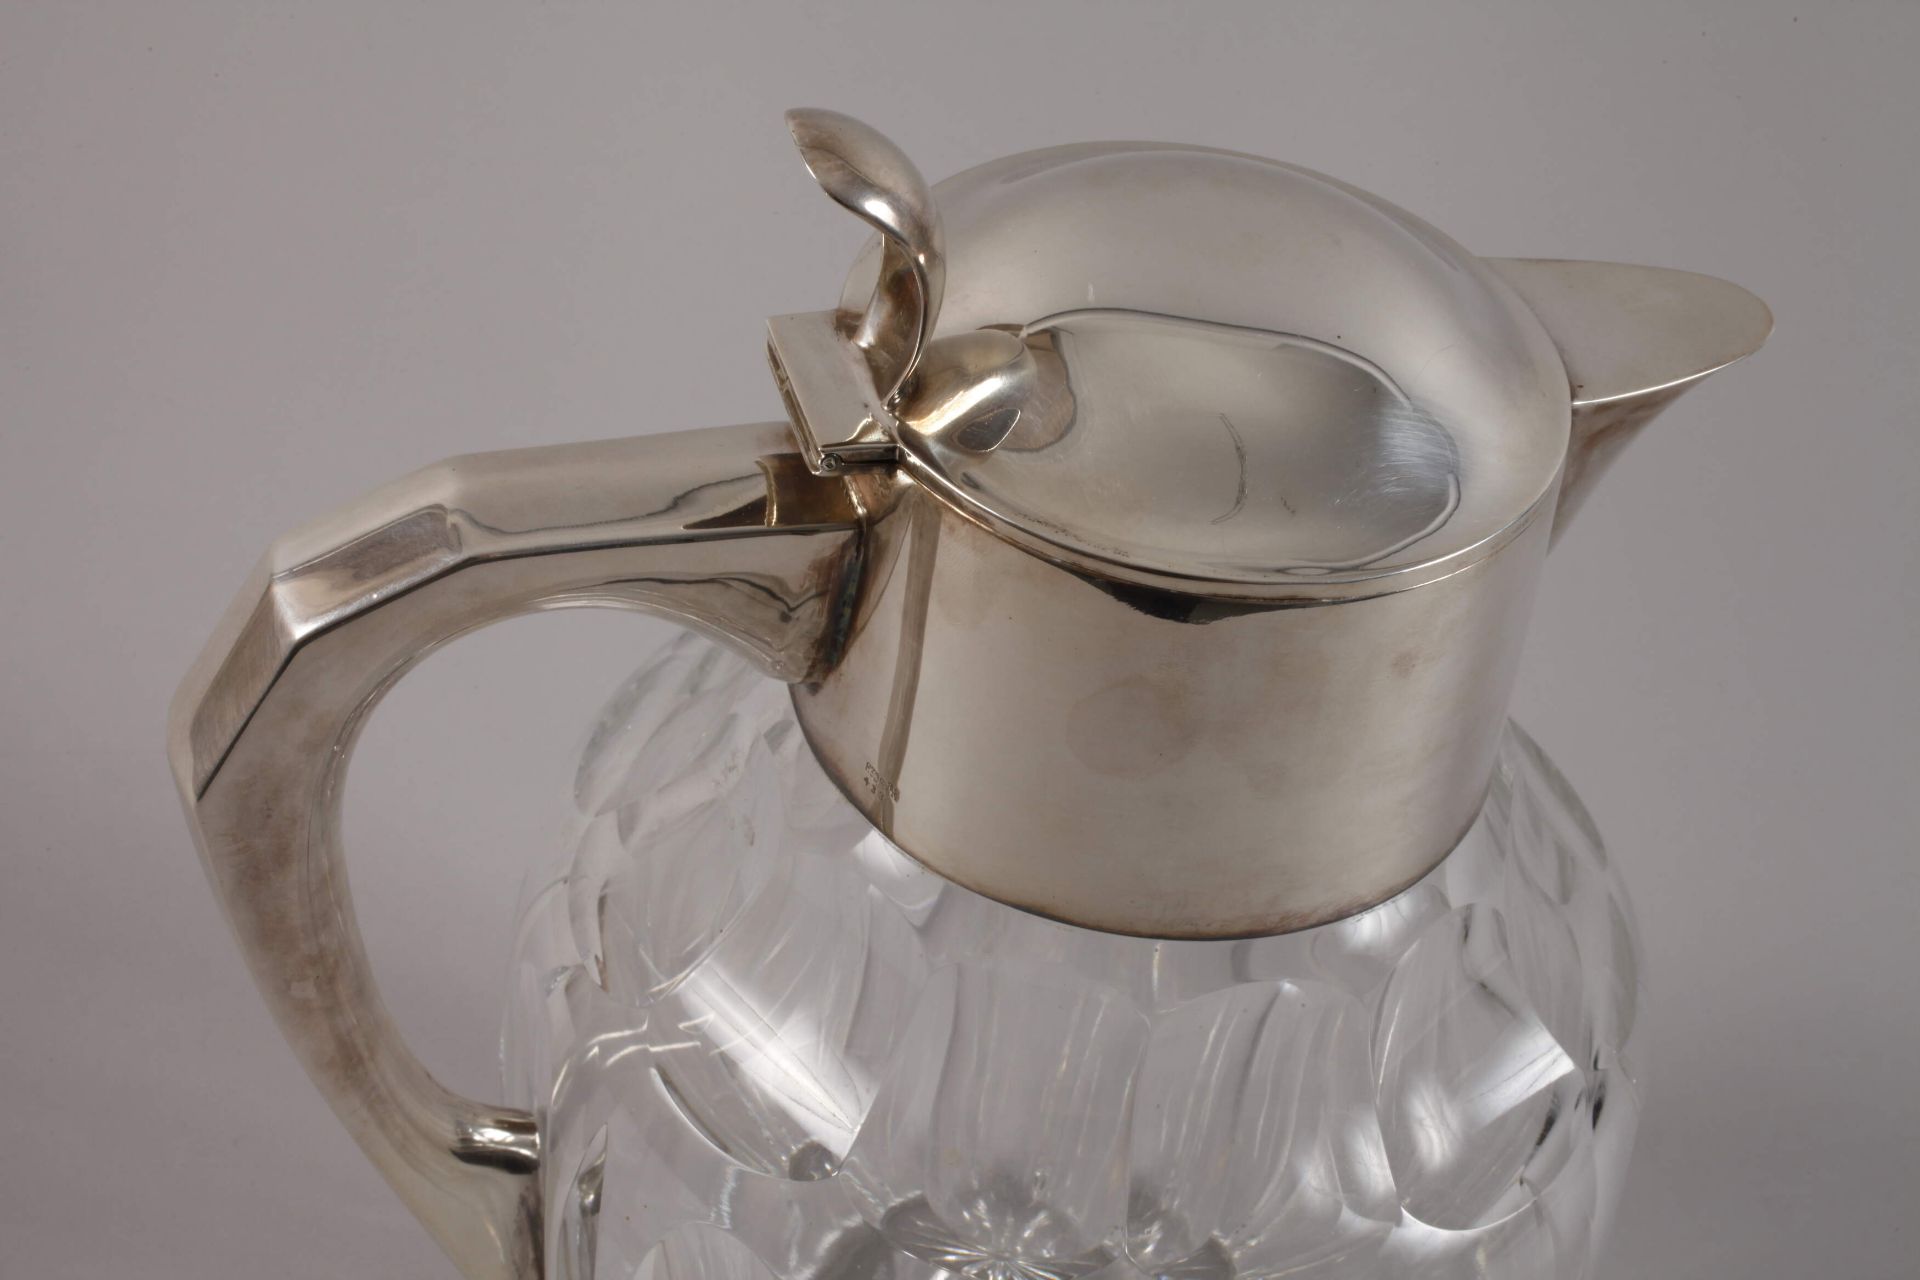 Large cooling jug with silver mounting - Image 2 of 5